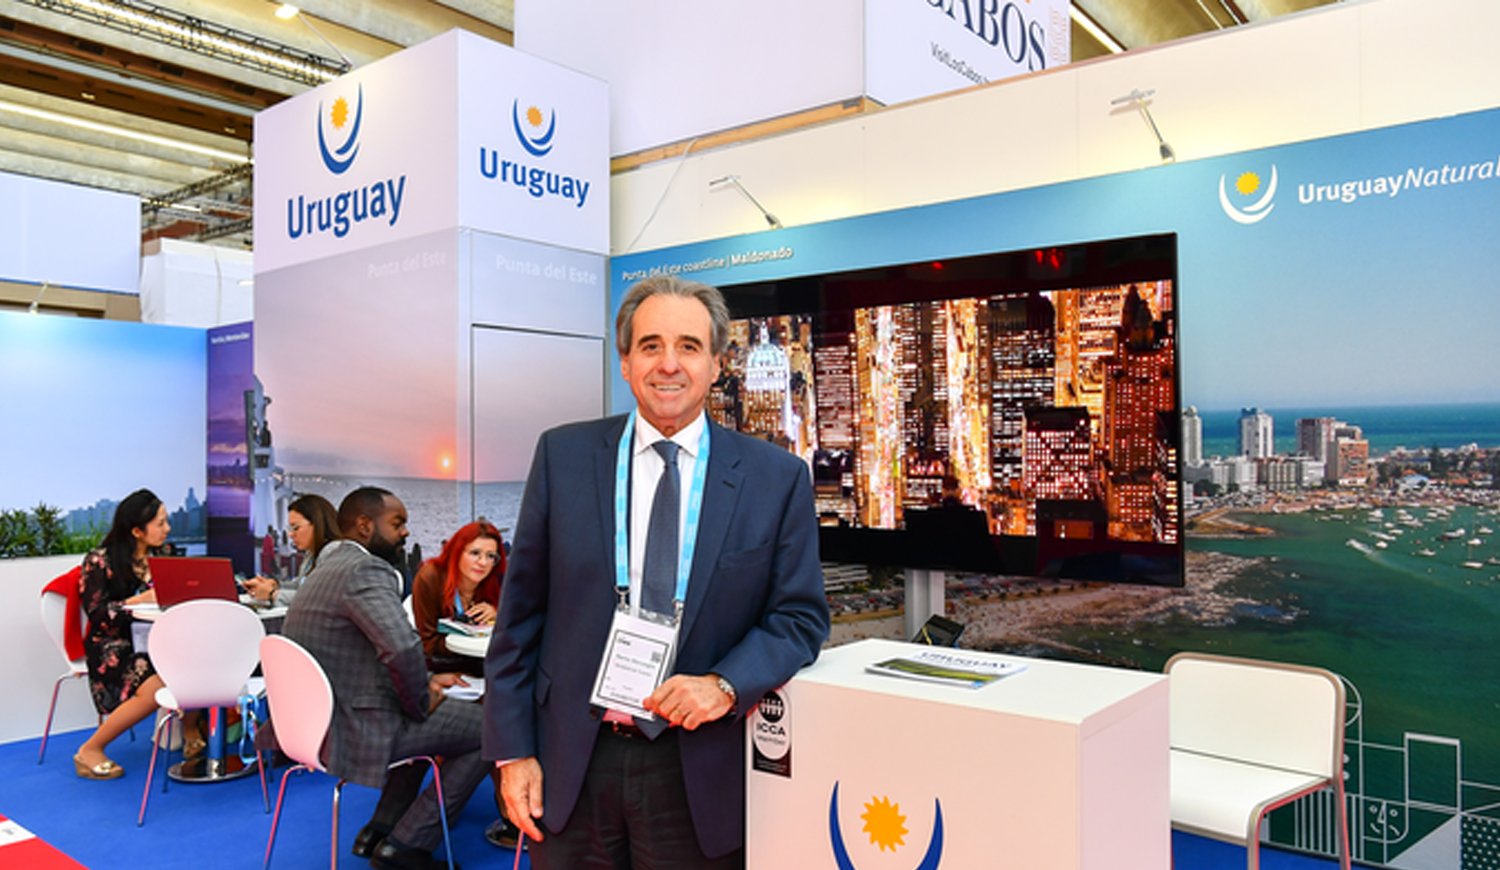 With great success, Uruguay participated in the largest tourism fair in the world